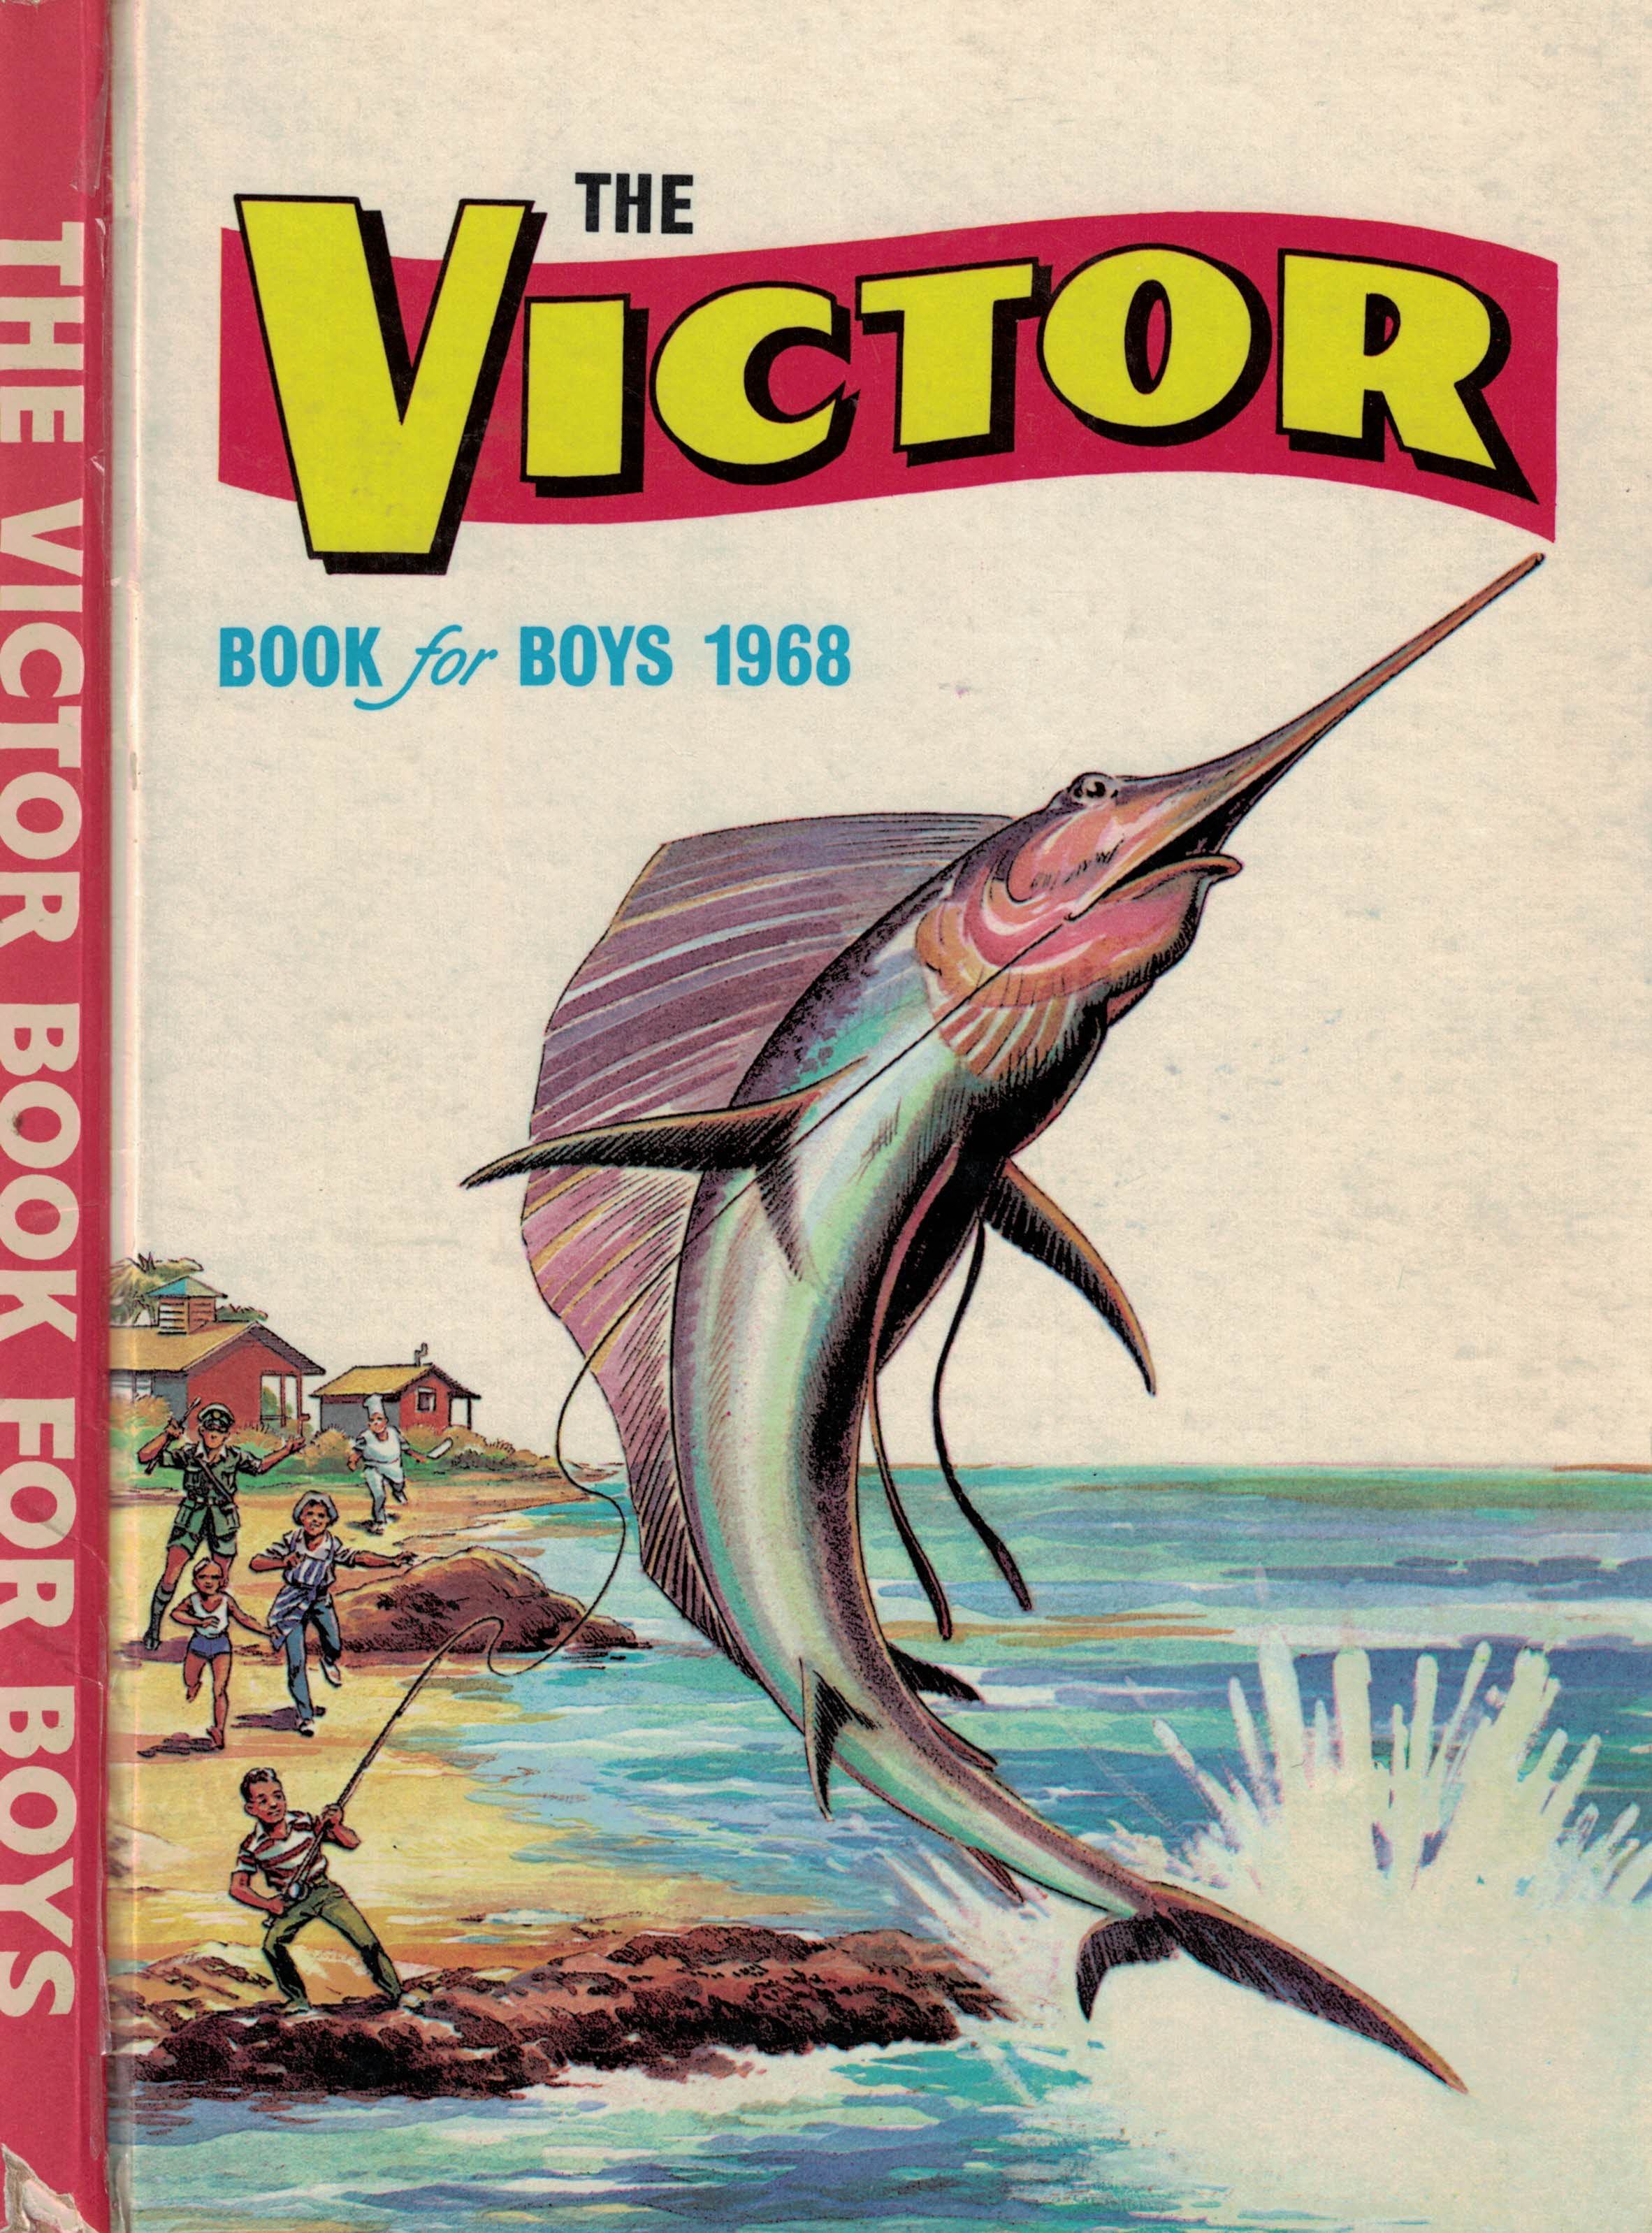 The Victor Book for Boys 1968